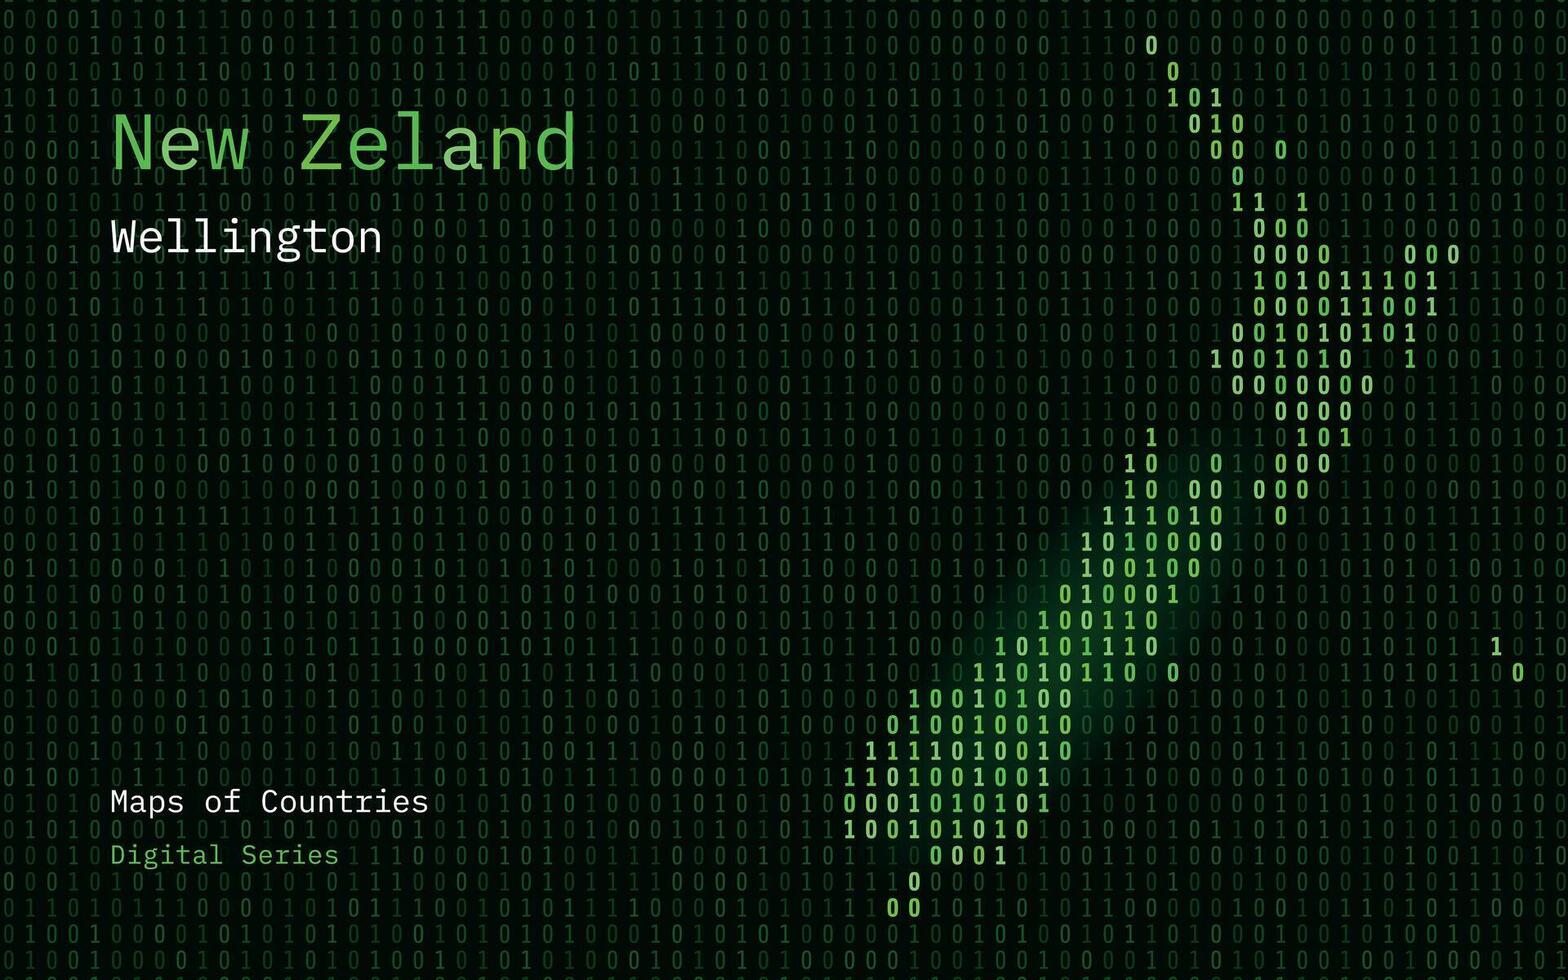 New Zeland Map Shown in Binary Code Pattern. Matrix numbers, zero, one. World Countries Vector Maps. Digital Series